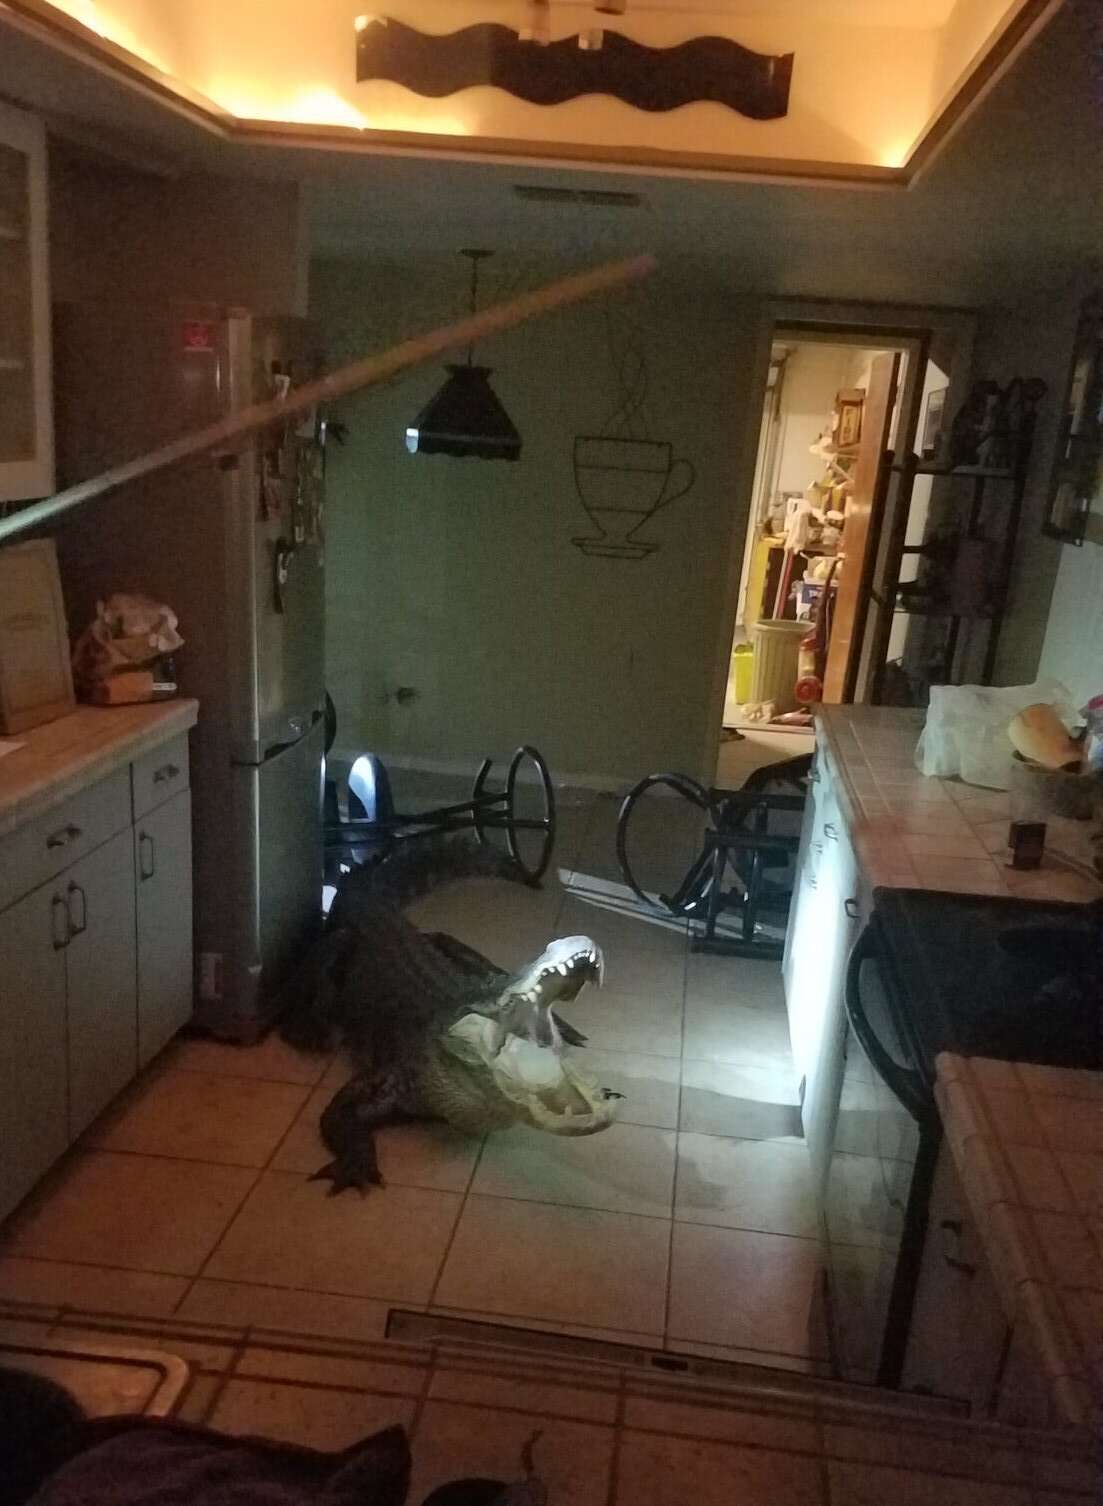 Huge alligator breaks into home in middle of night